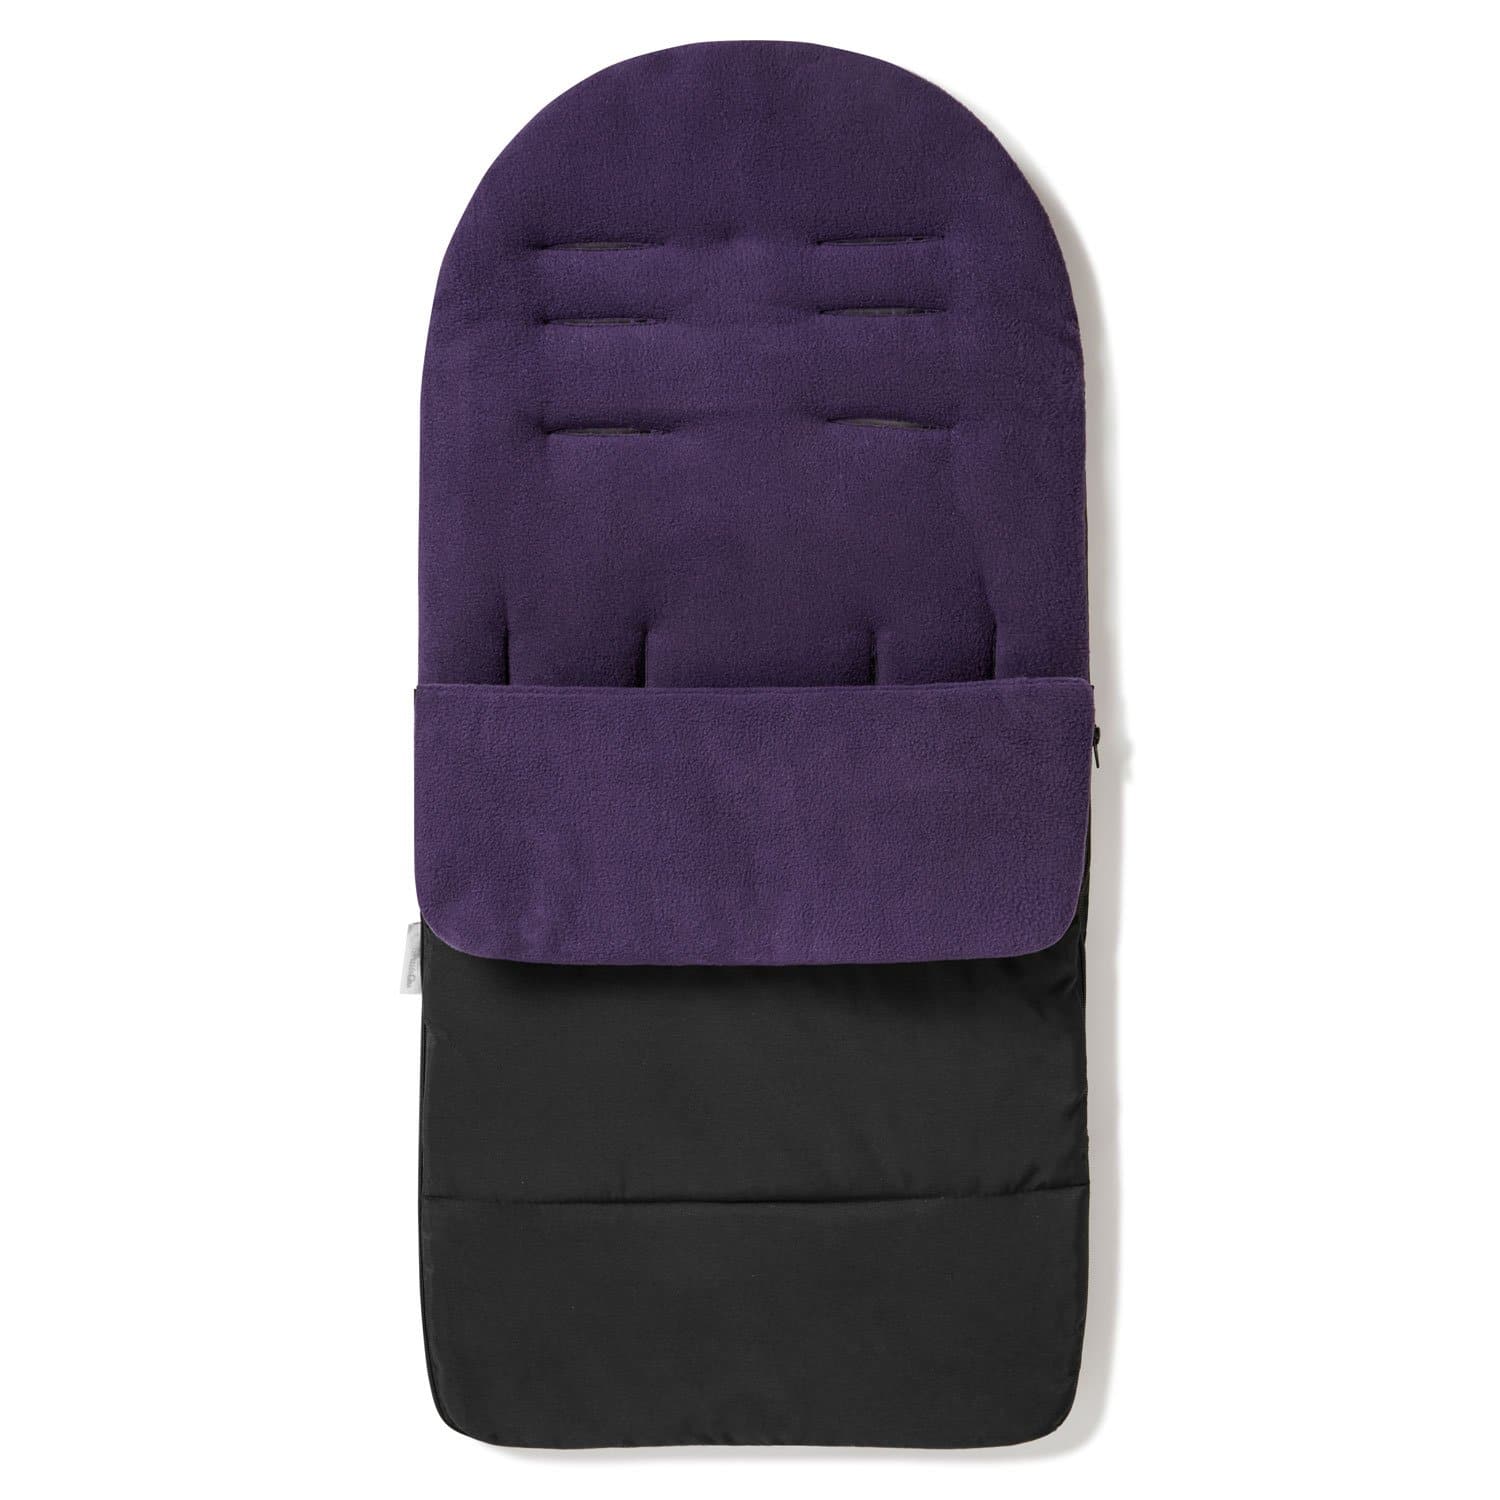 Premium Footmuff / Cosy Toes Compatible with Infababy - Plum Purple / Fits All Models | For Your Little One